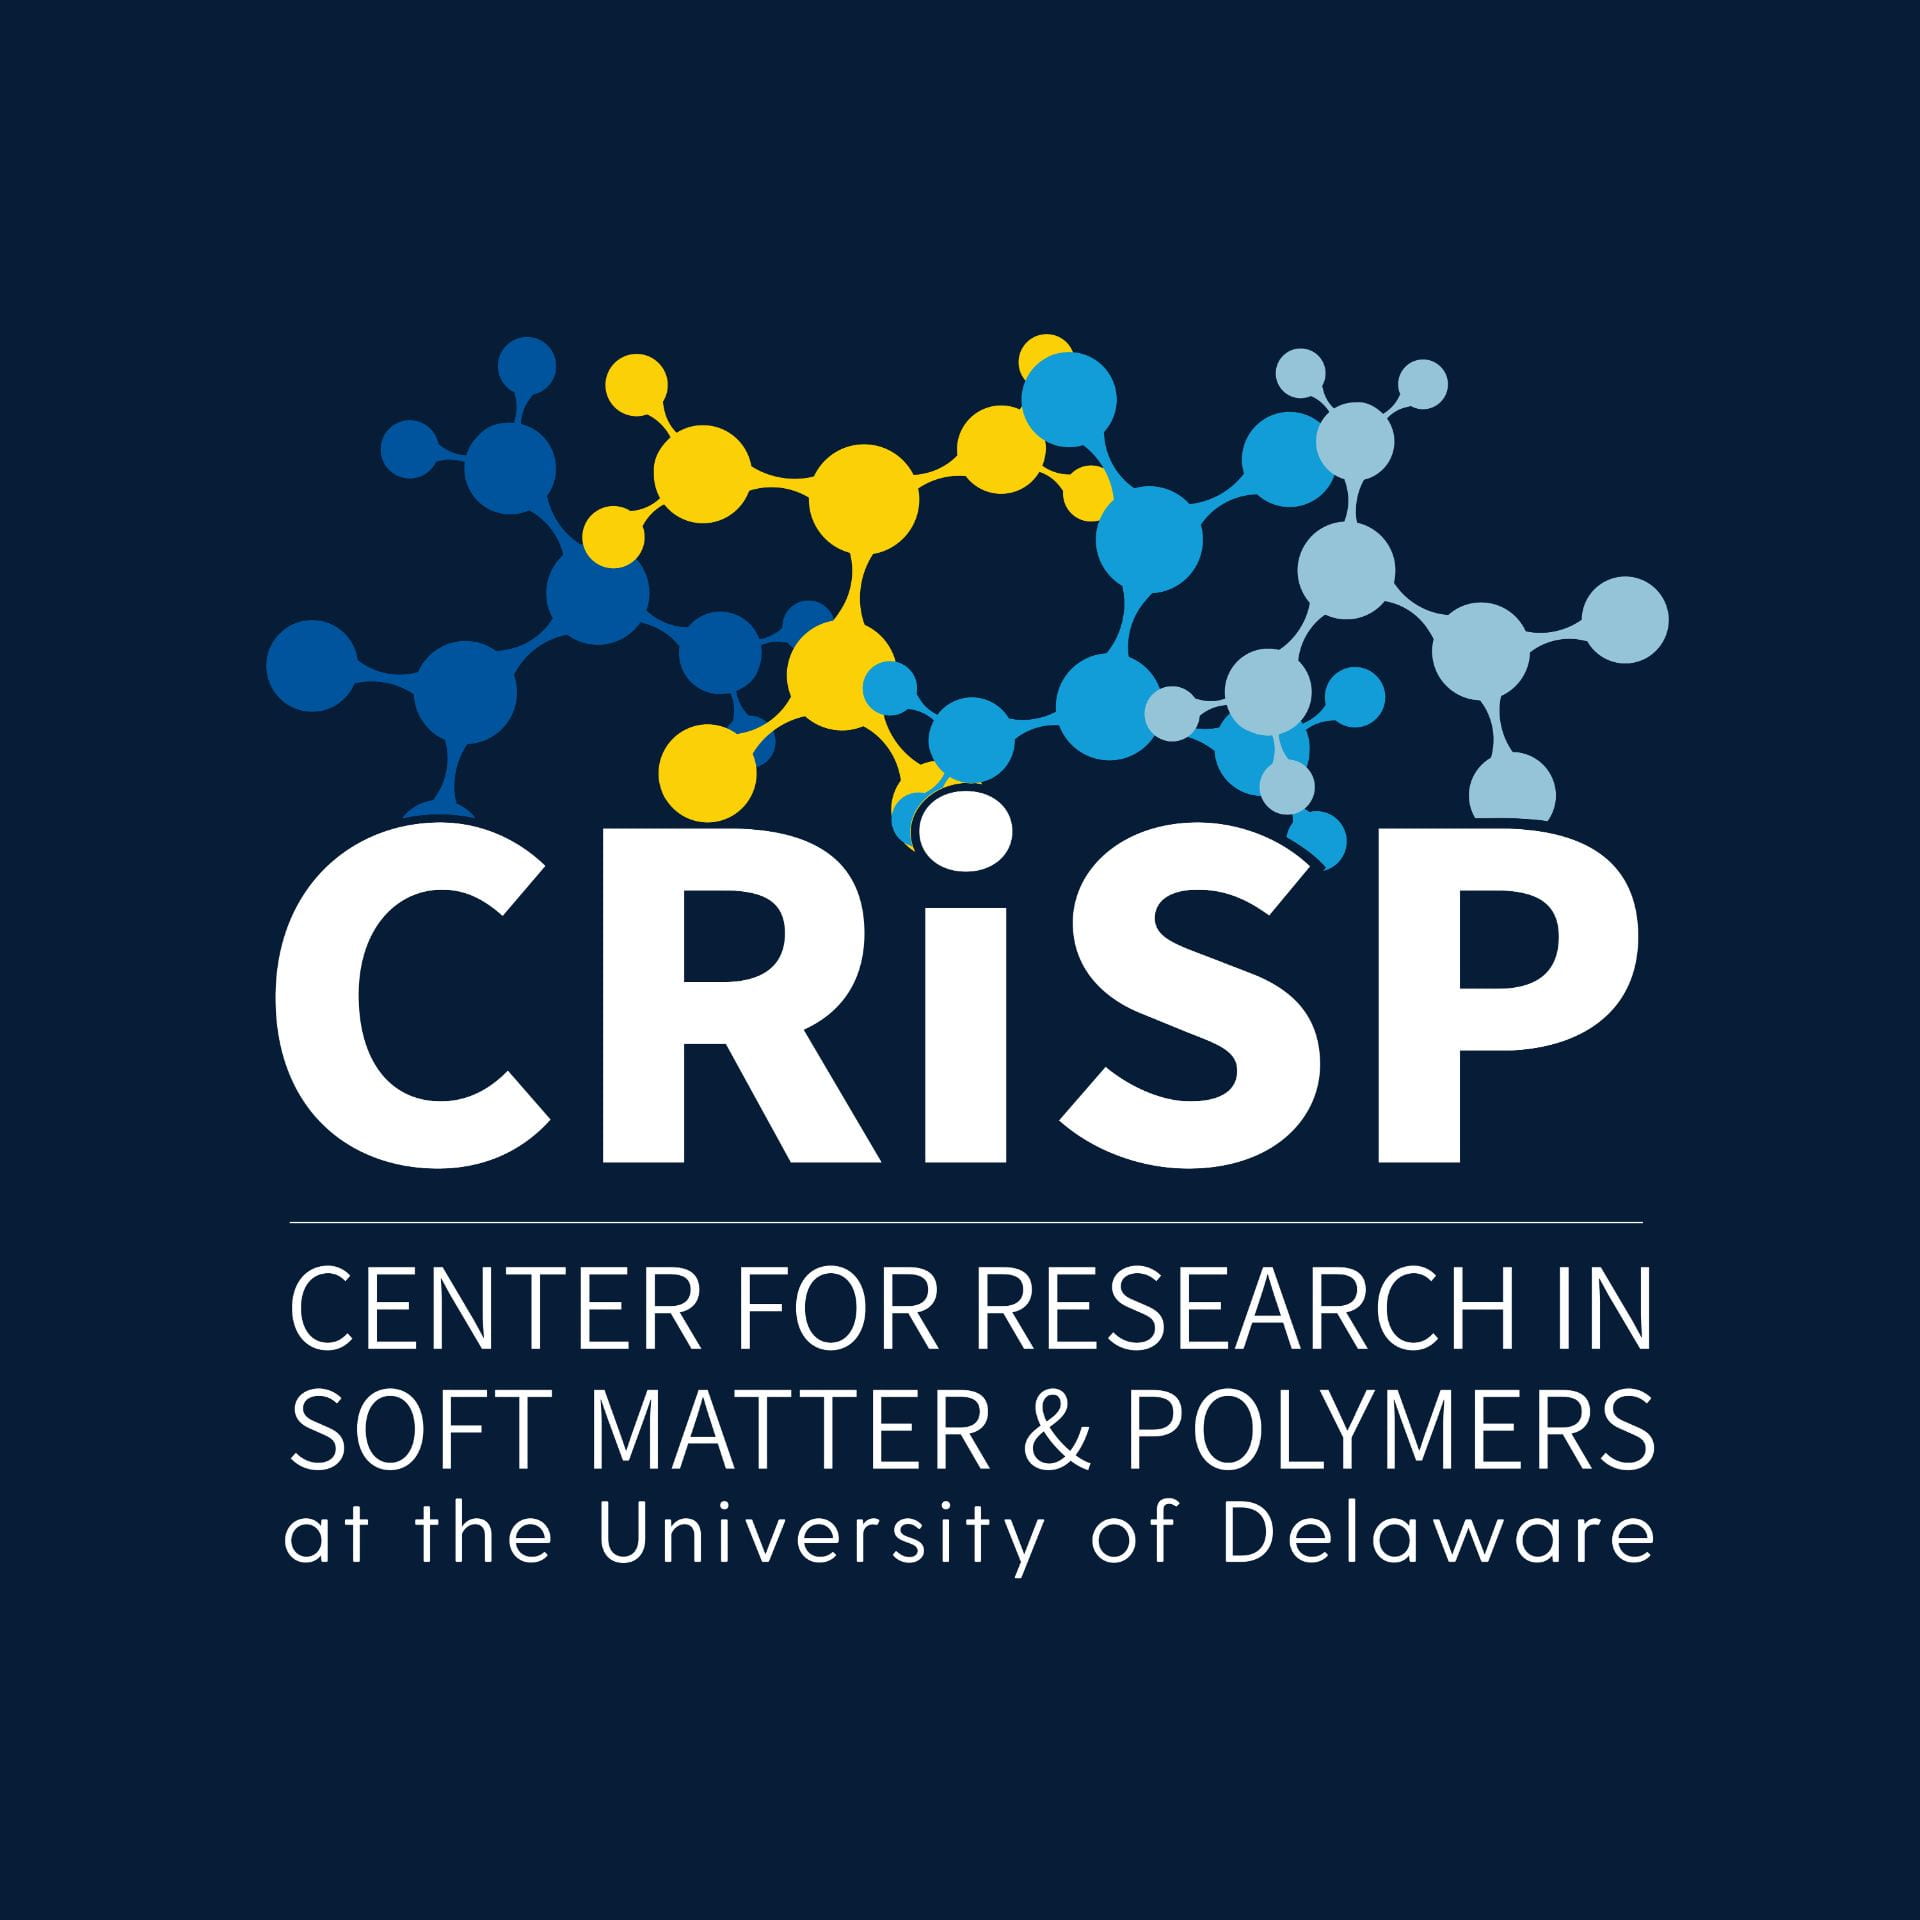 Center for Research in Soft matter & Polymers